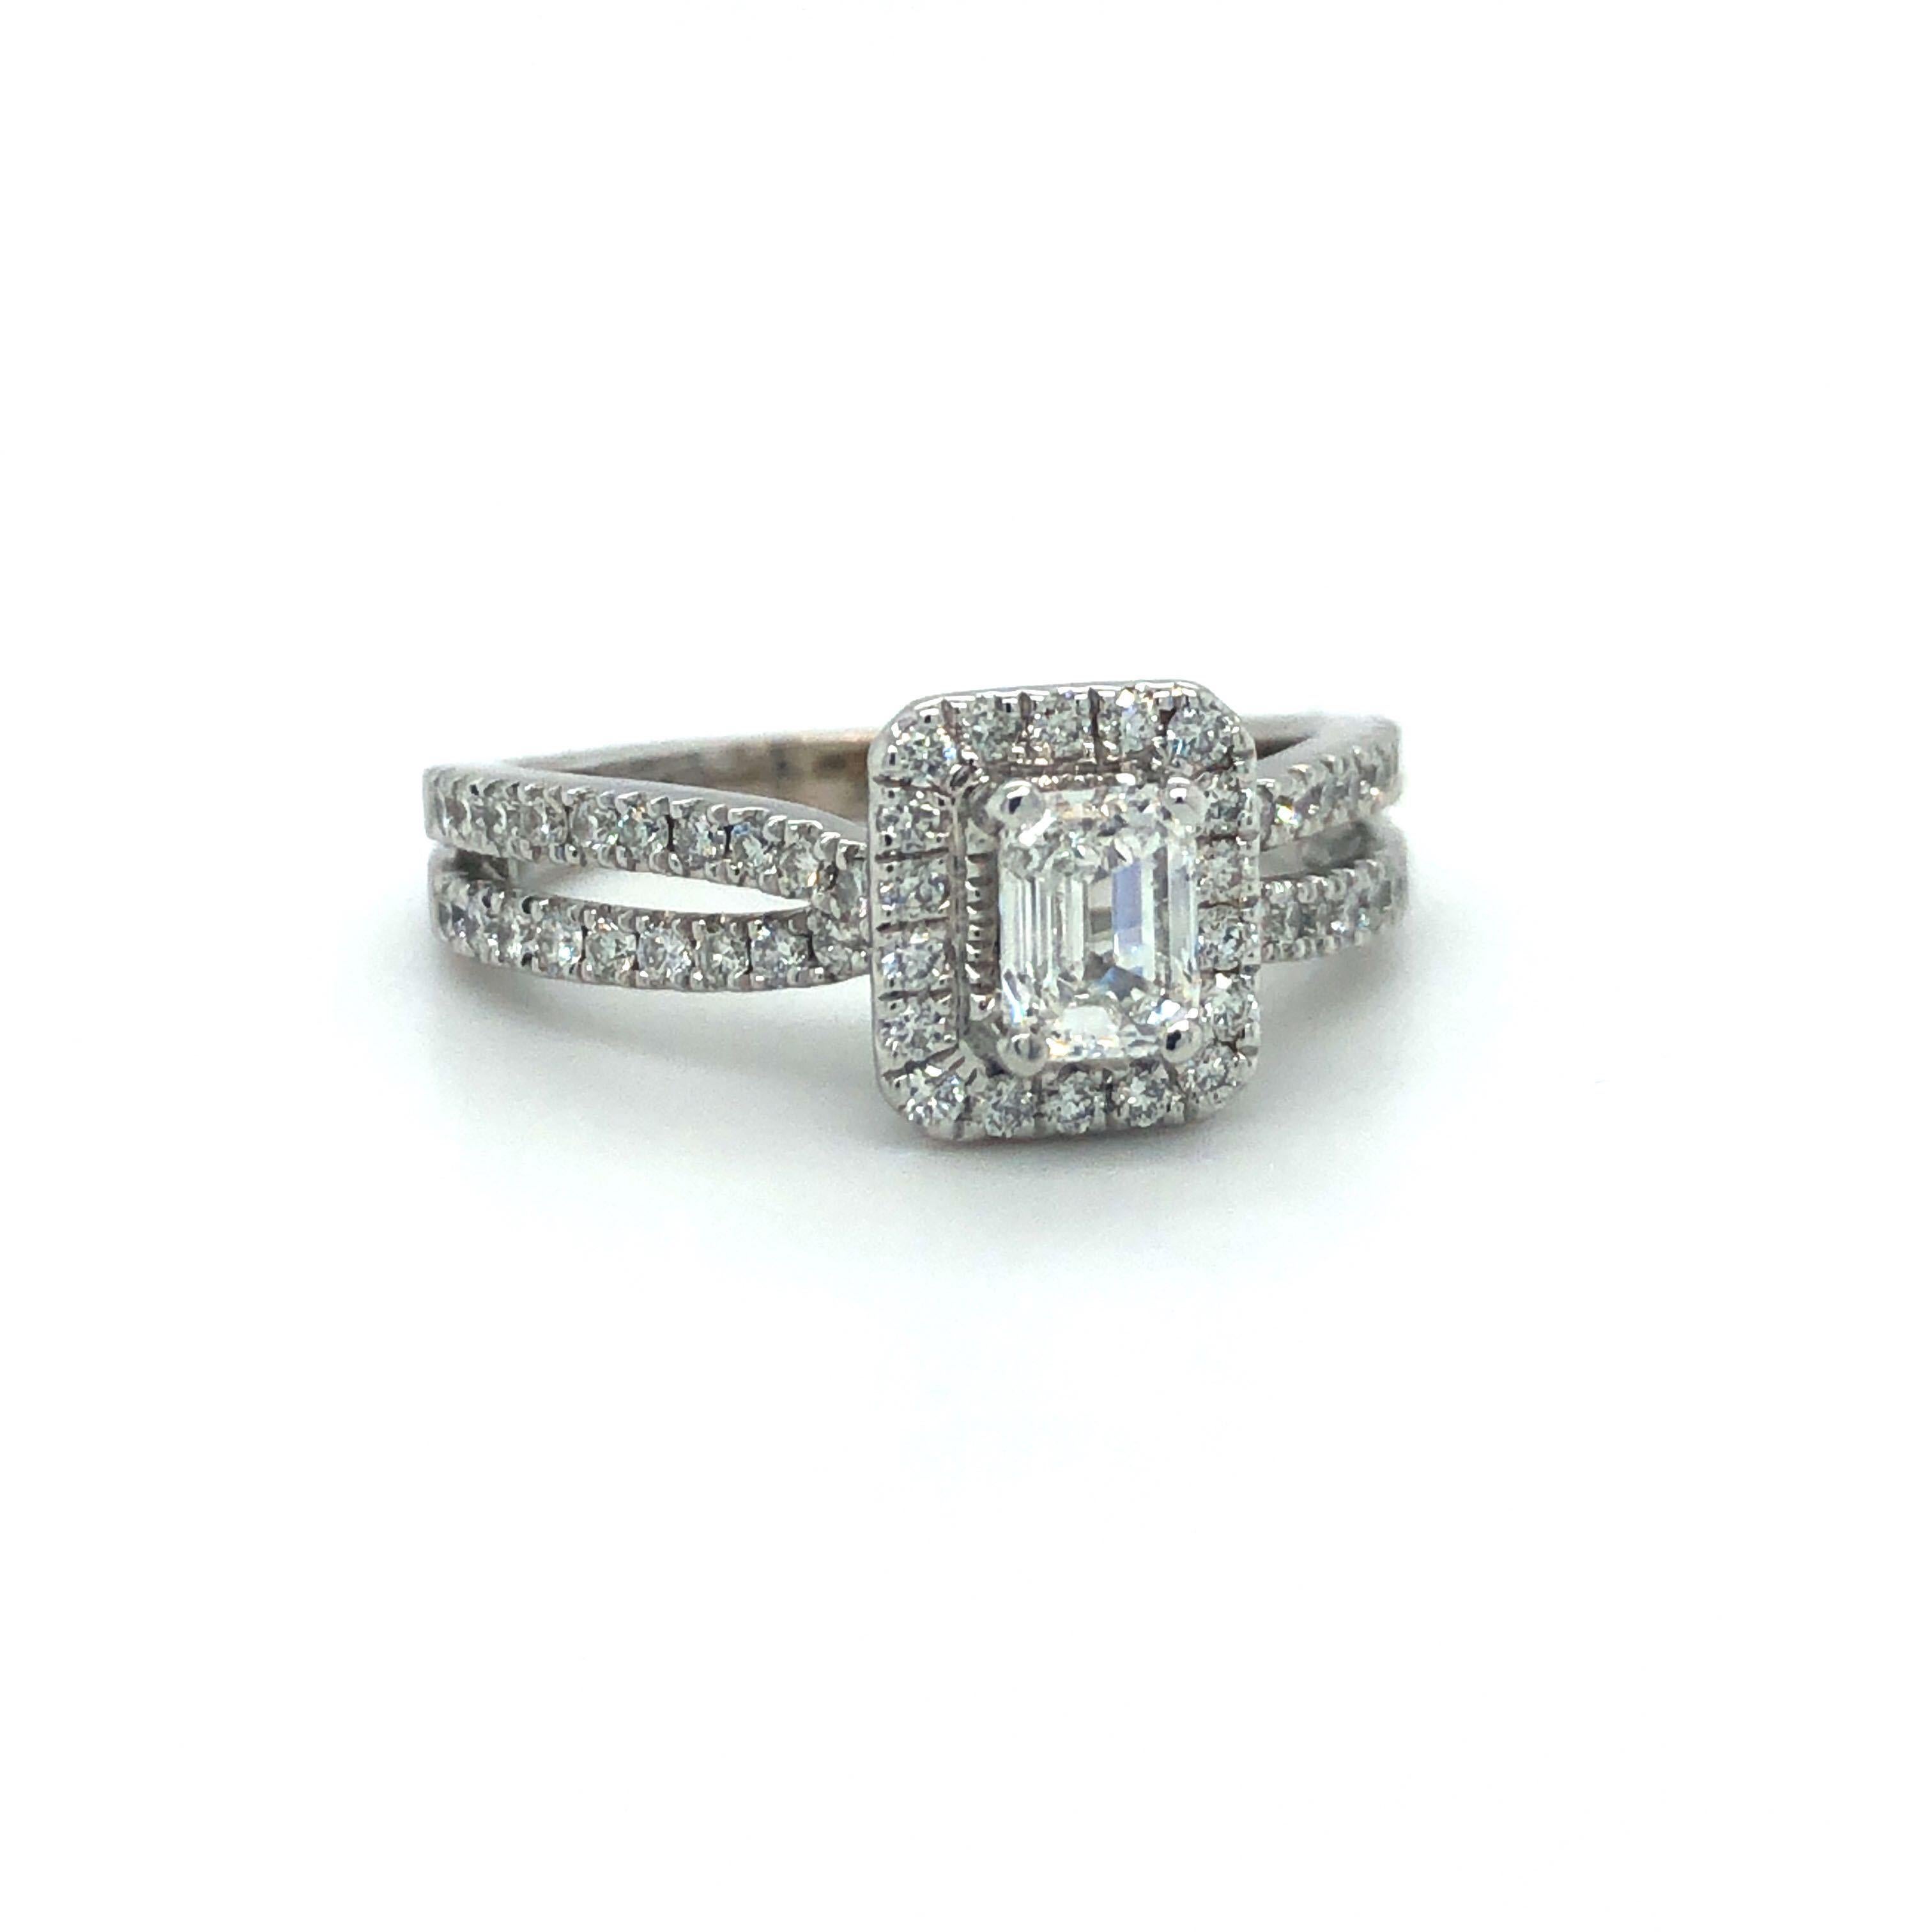 Vera Wang 14k White Gold Emerald Cut Diamond Halo Engagement Ring Size 6.75

Condition:  Excellent Condition, Professionally Cleaned and Polished
Metal:  14k Gold (Marked, and Professionally Tested)
Center Diamond:  Emerald Cut .50ct Diamond
Center